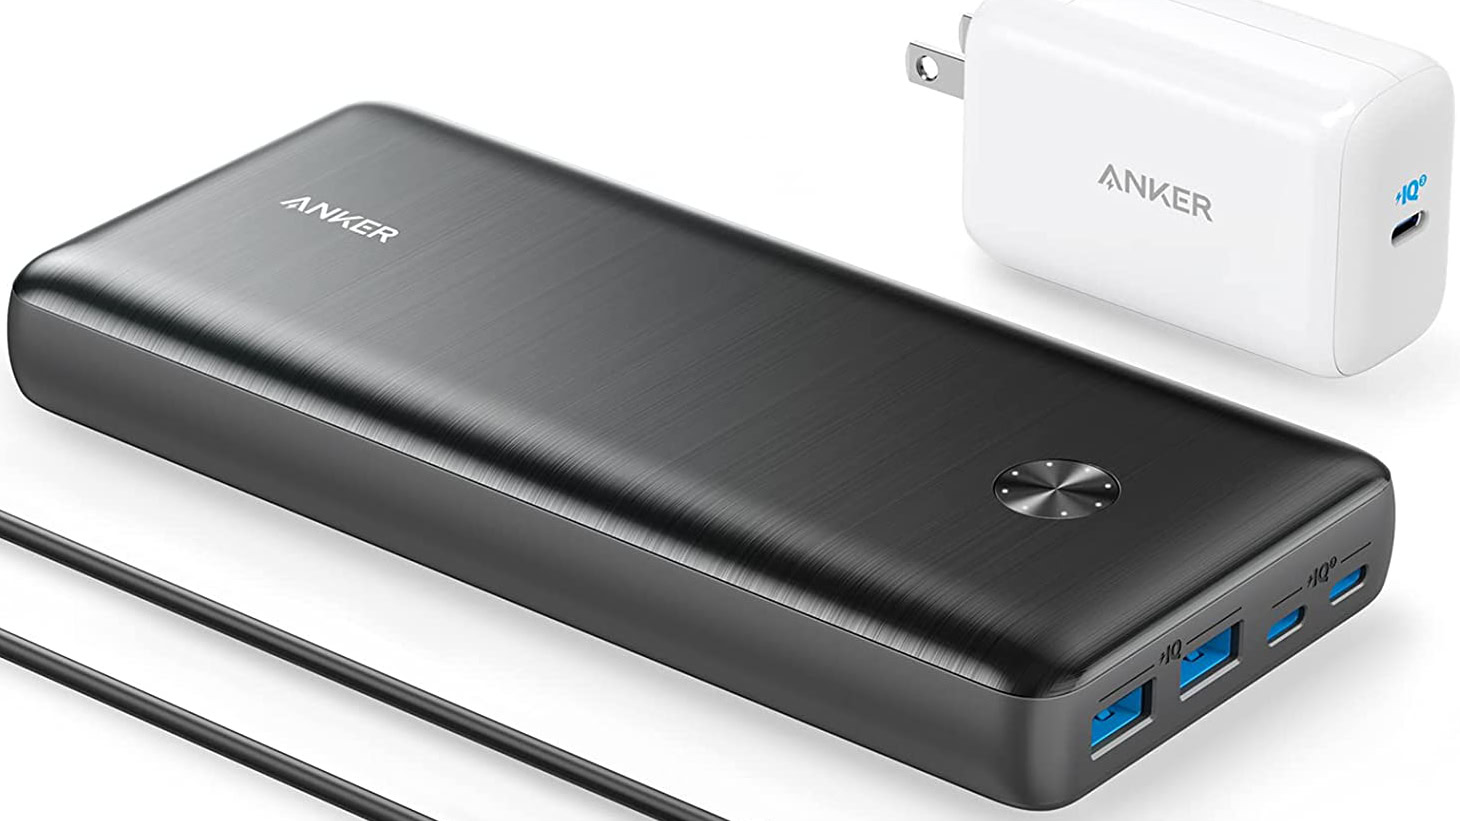 Anker 737 Power Bank - The best portable chargers